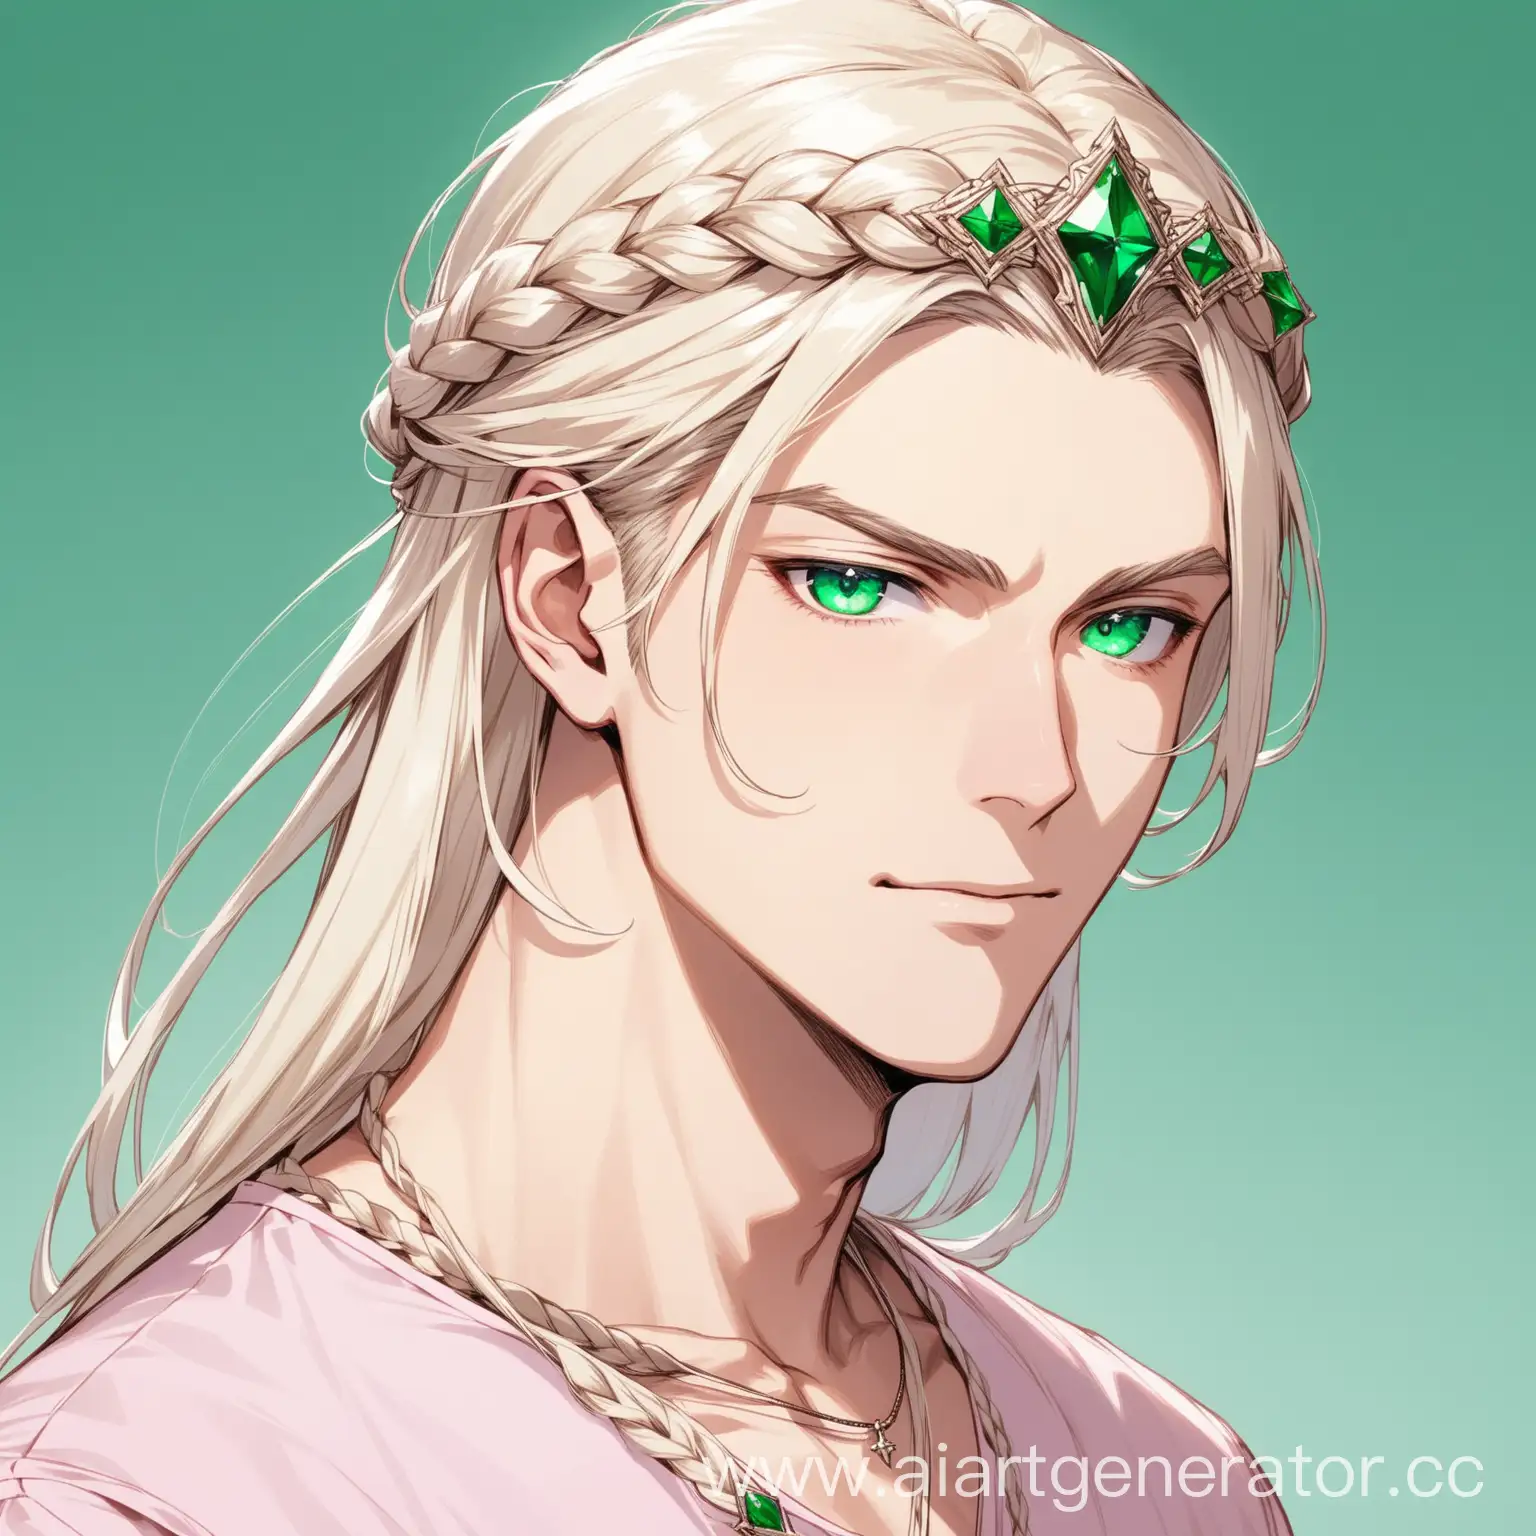 Mysterious-Man-with-Emerald-Green-Eyes-and-Unkempt-Platinum-Blond-Hair